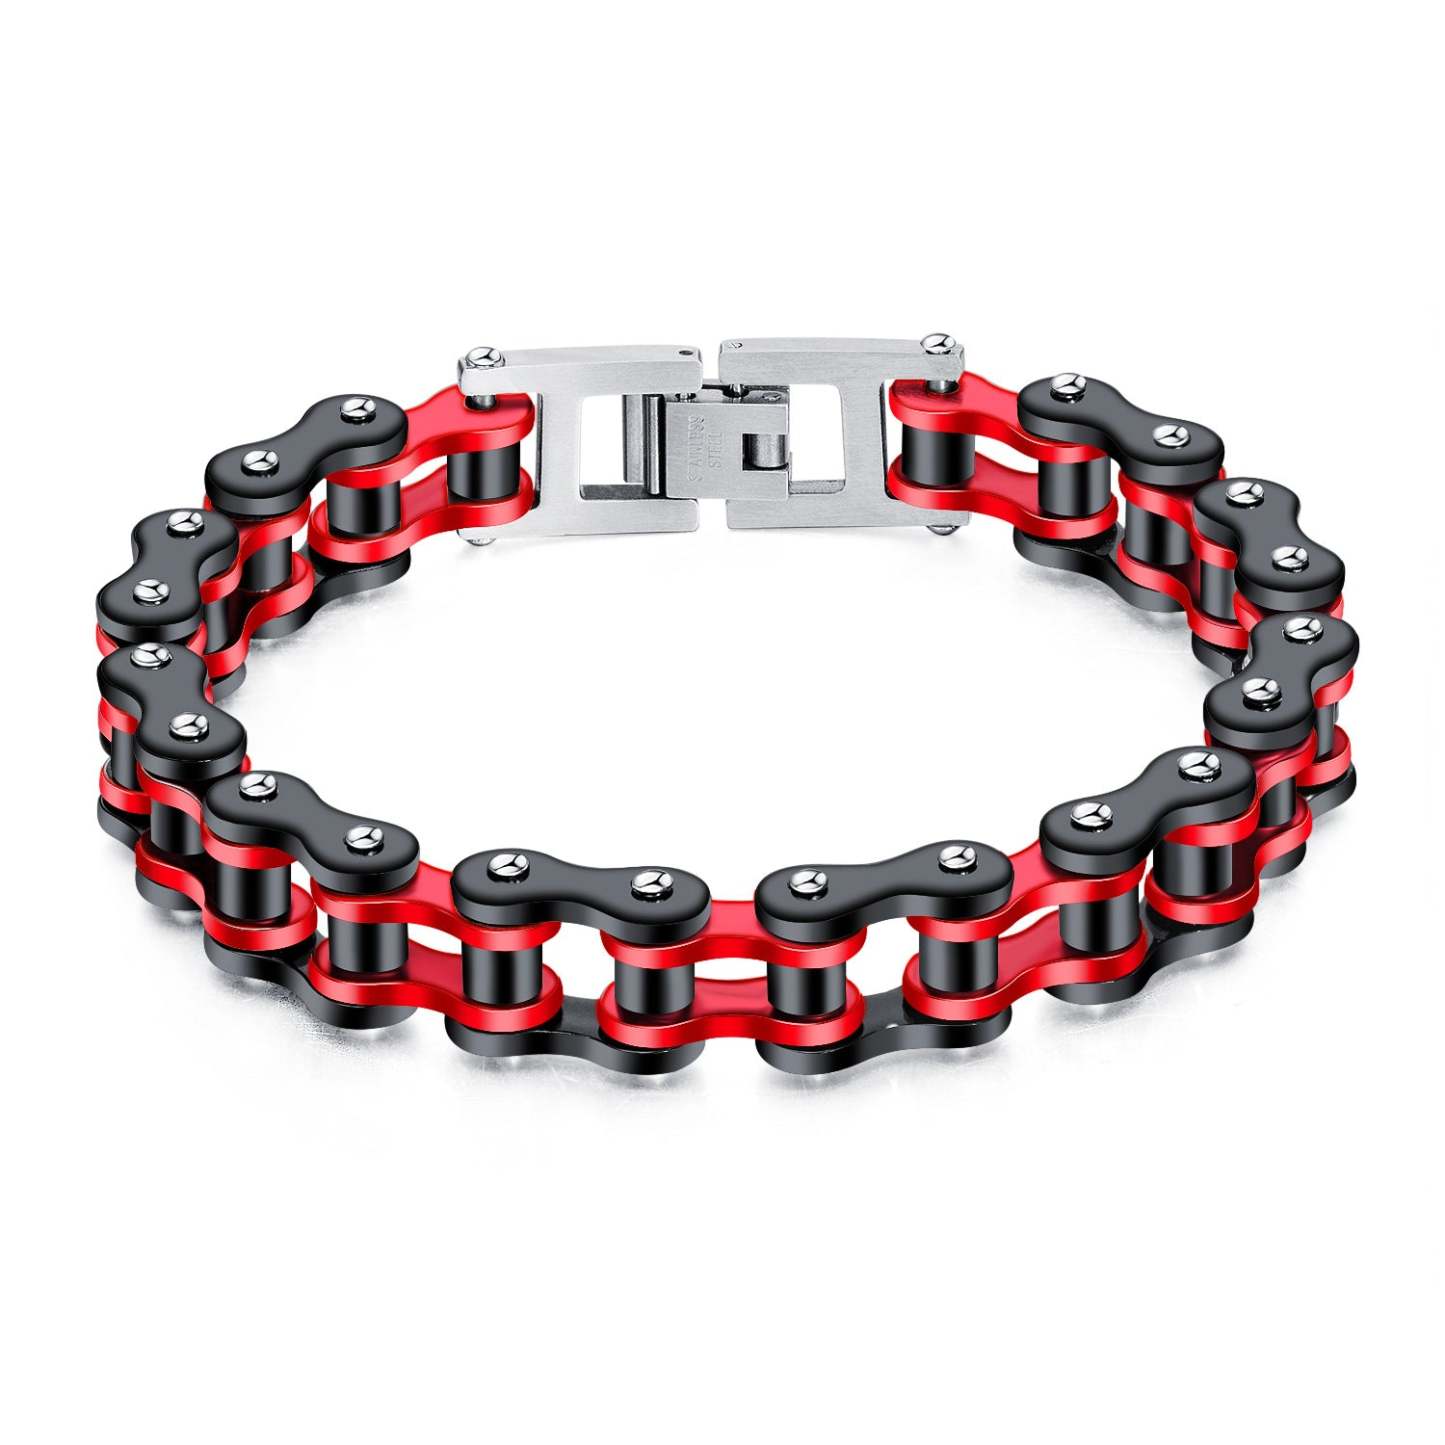 Retro Bicycle Chain Bracelet Black Blue Gifts for Fashion Men - soufeelmy